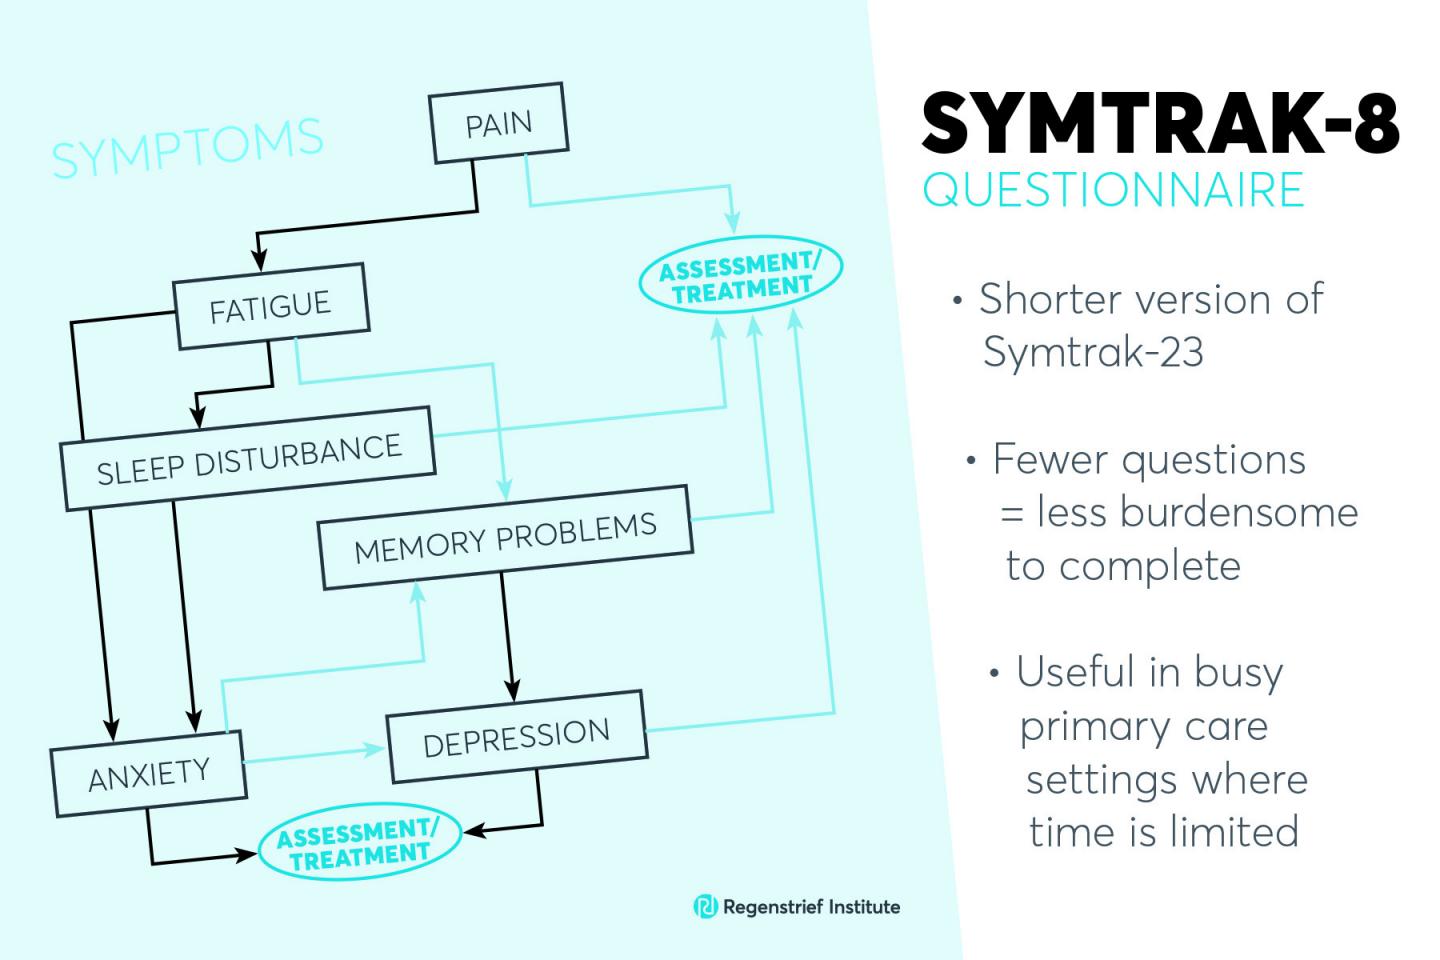 SymTrak-8 helps patients and their healthcare providers tackle symptoms